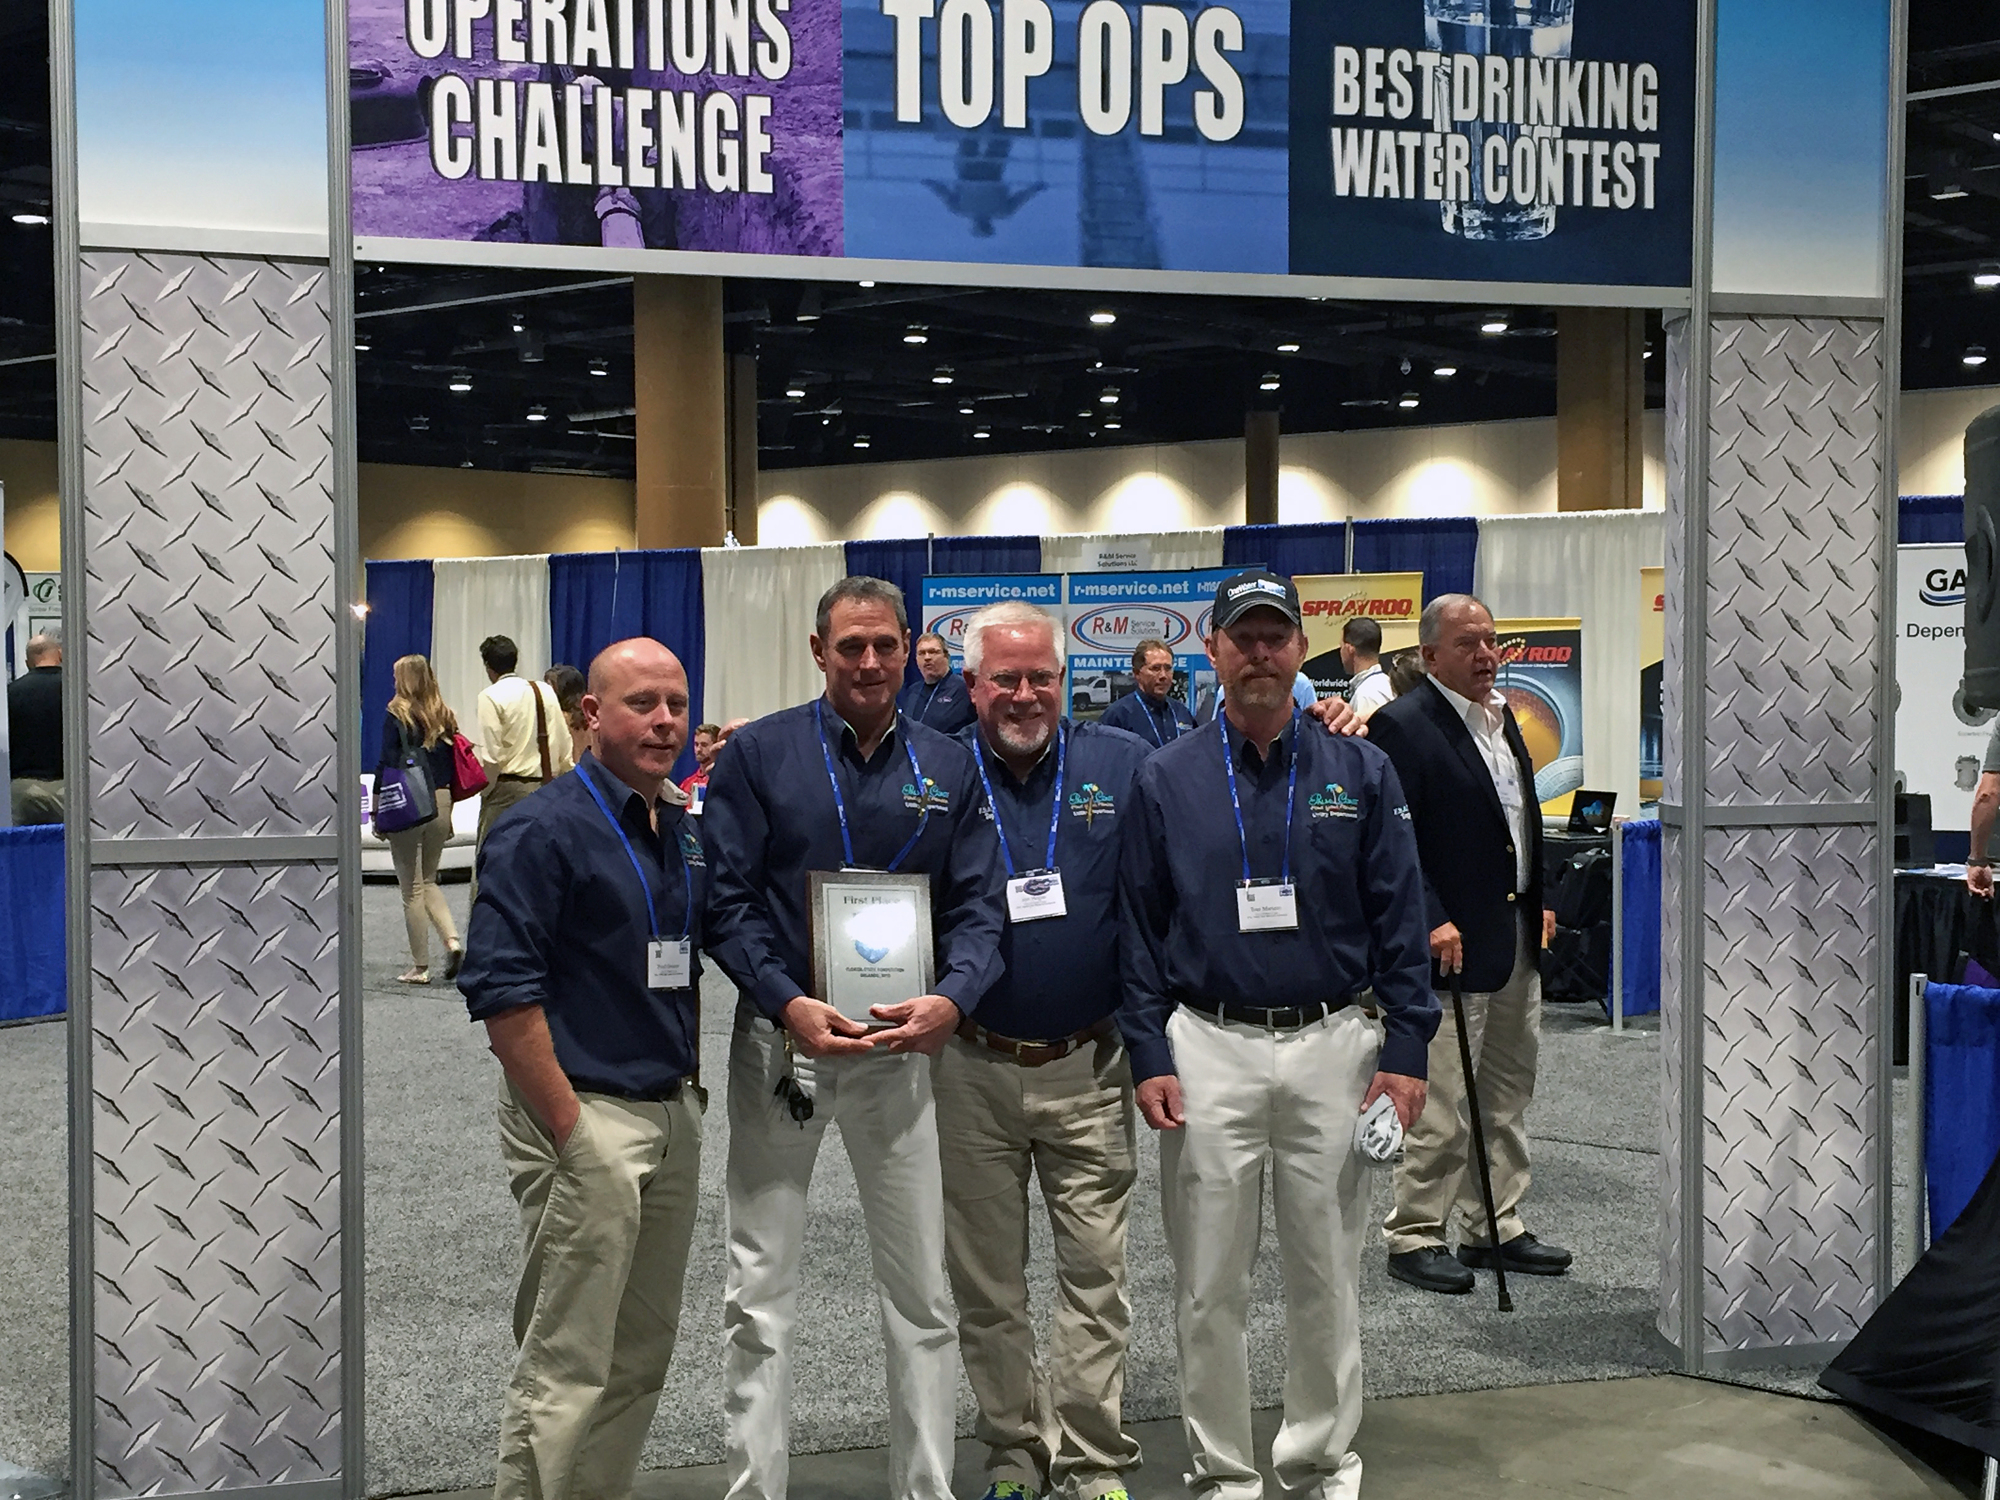 The Top Ops State Championship team is, from left: Fred Greiner, Peter Roussell, Jim Hogan and Tom Martens, all of the Palm Coast Utility Department. (Courtesy photo)